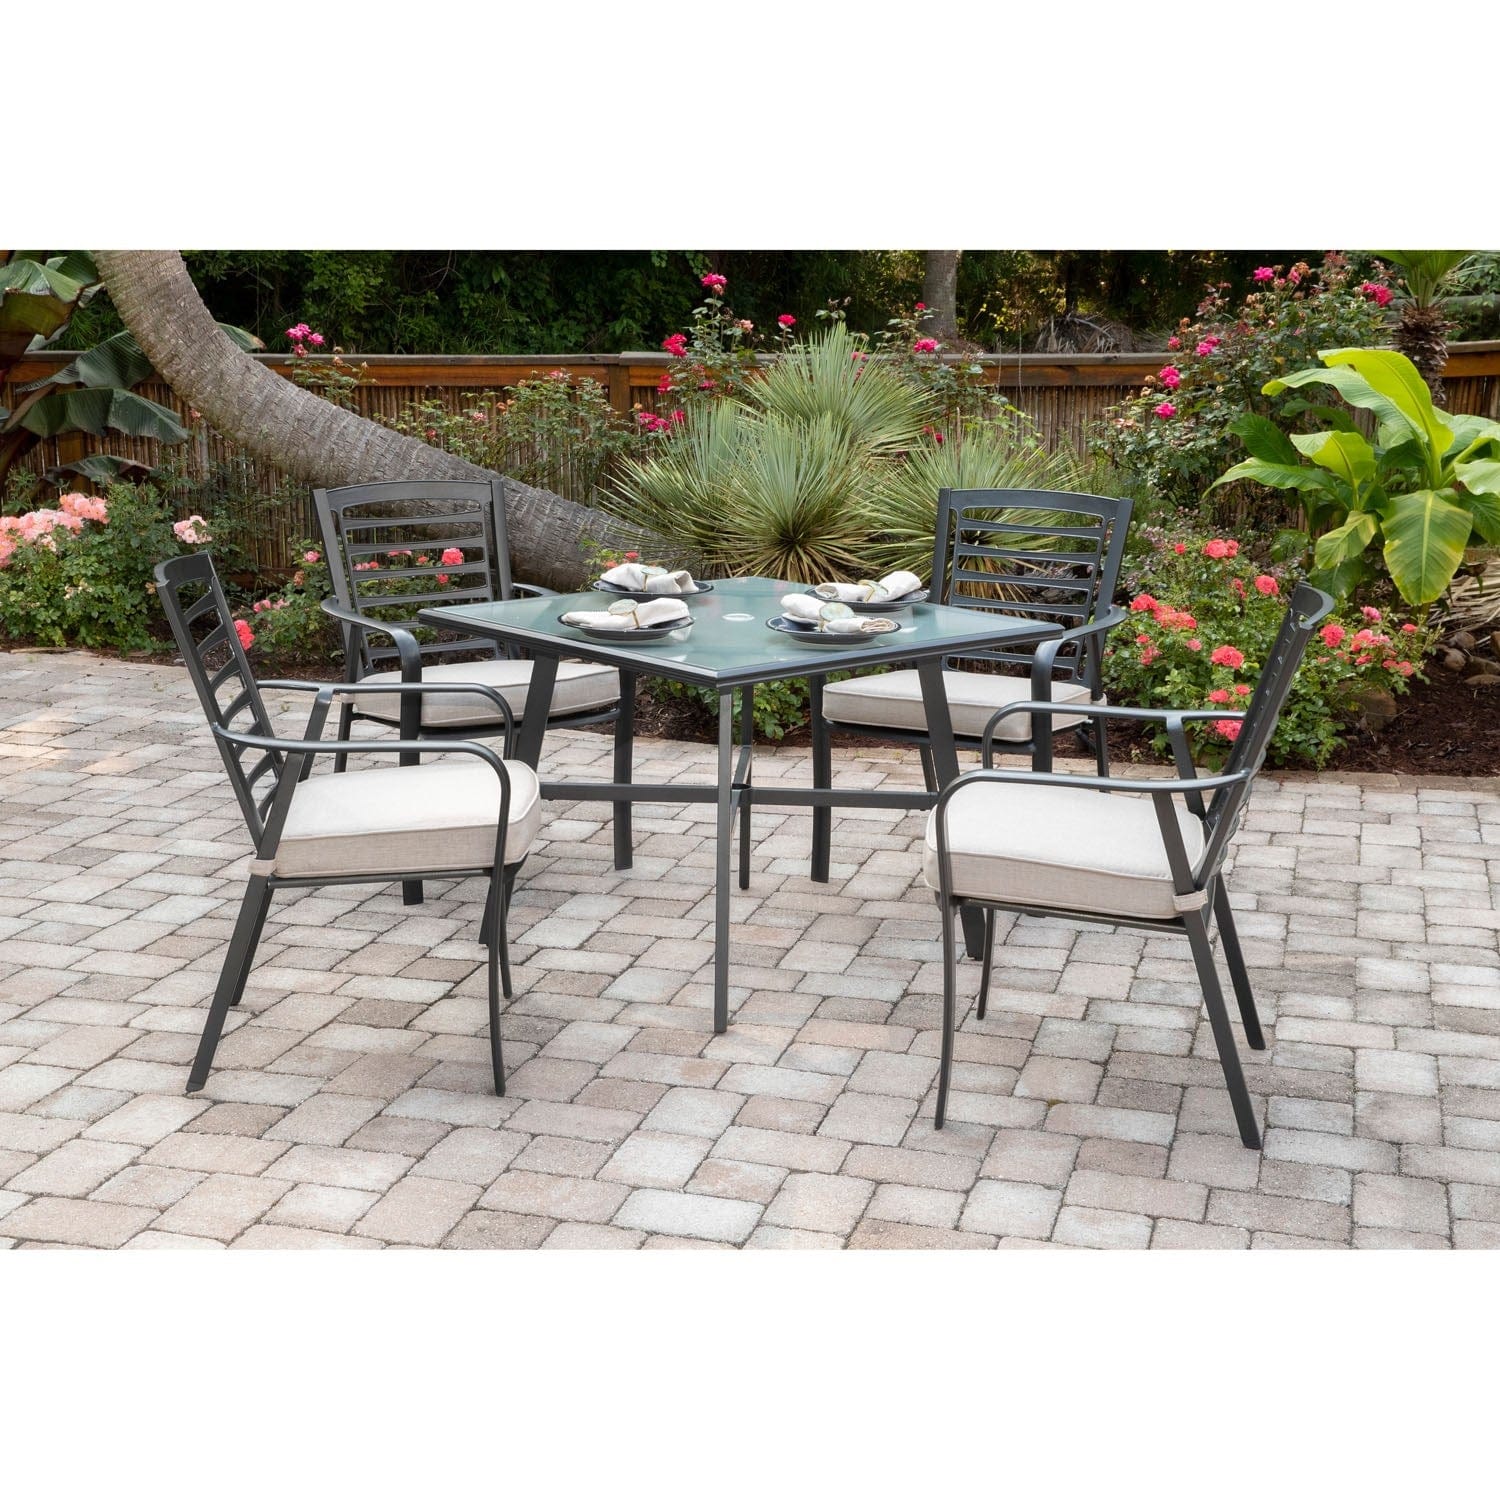 Hanover Outdoor Dining Set Hanover - Pemberton 5-Piece Commercial-Grade Patio Set with 4 Cushioned Dining Chairs and a 38" Square Glass-Top Table